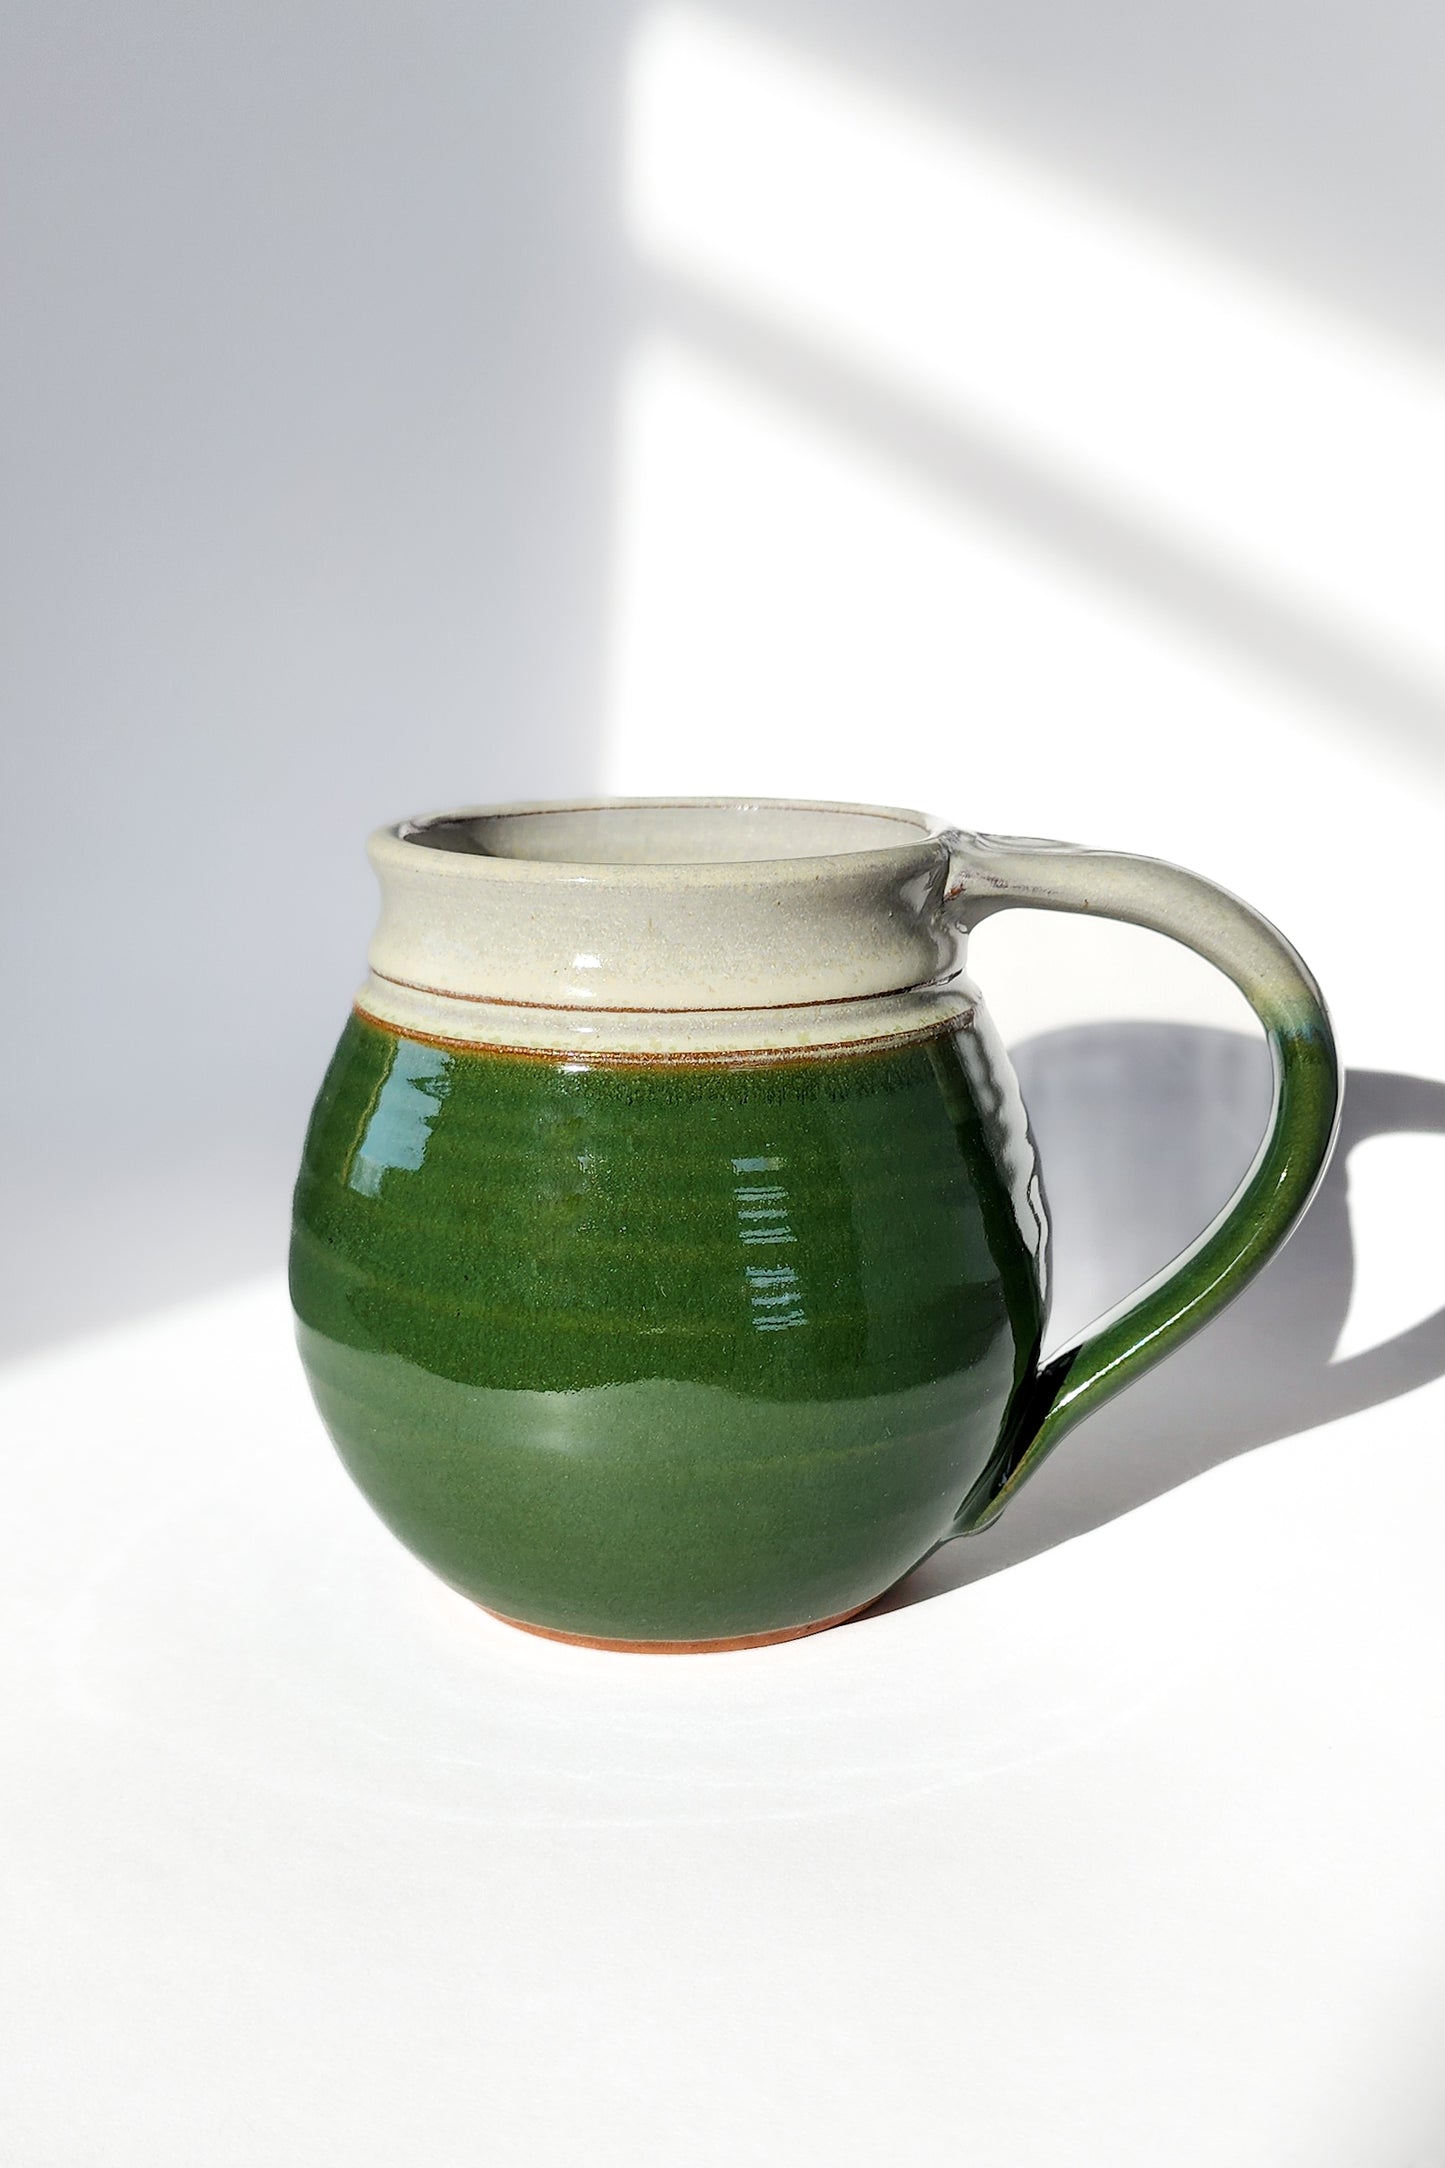 Image: Clinton Pottery's 30 oz Jumbo Mug in Dark Green – A serene and generously sized addition to your kitchen, this machine washable mug seamlessly blends artistry with functionality. The deep Dark Green color adds a touch of tranquility, reminiscent of lush forests and nature's beauty. Perfect for enjoying ample servings of your favorite coffee or tea with a hint of natural elegance.